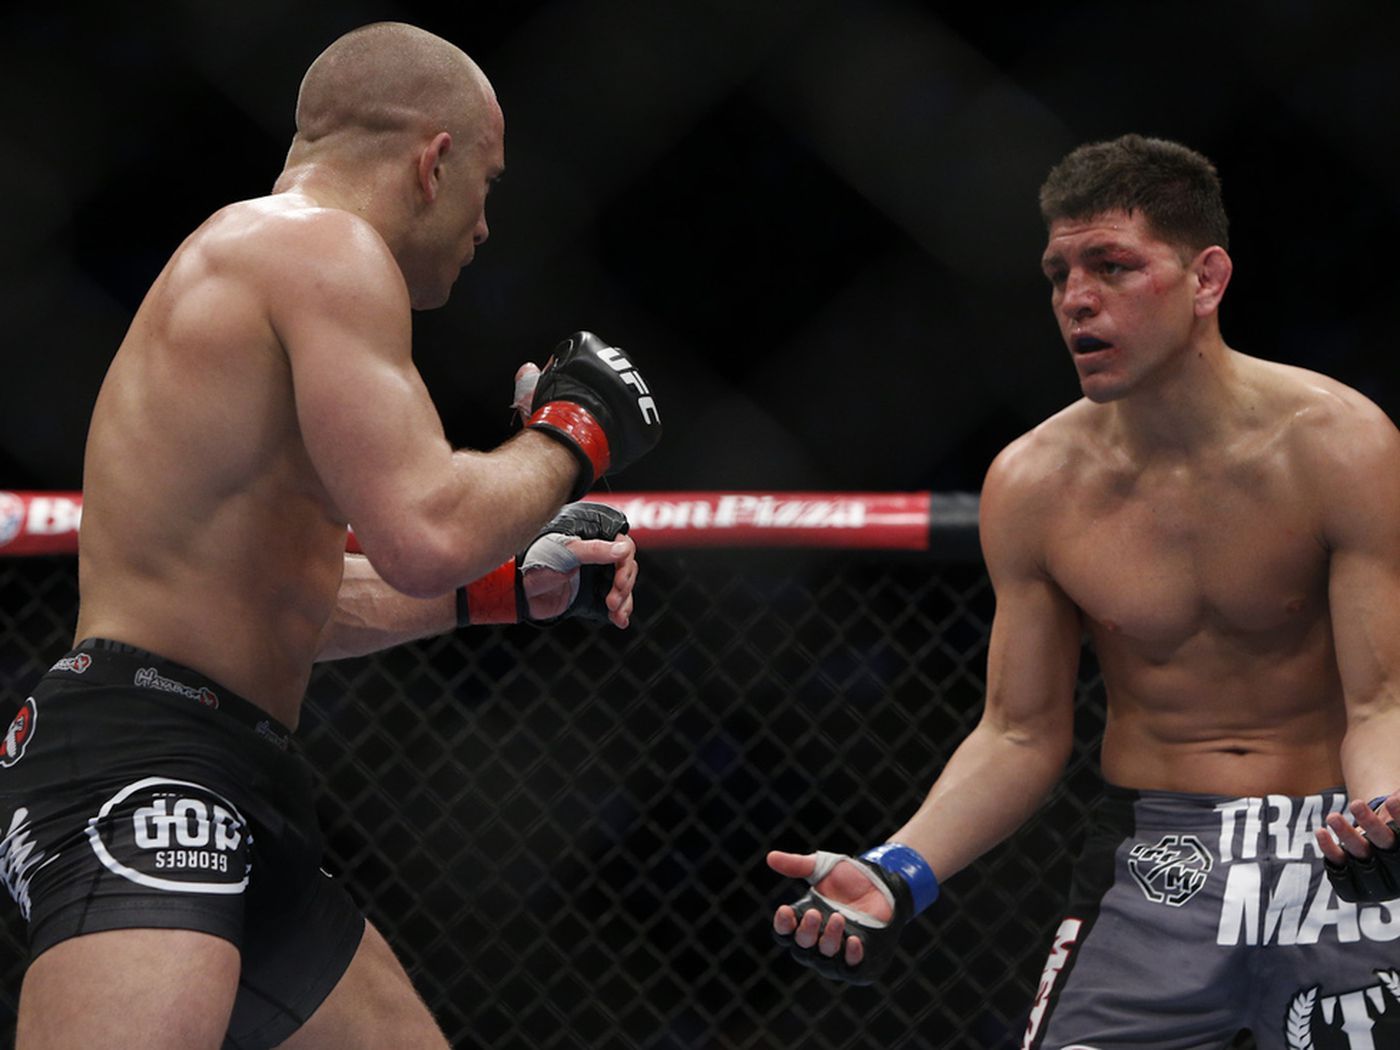 Nick Diaz Slams Georges St Pierre For UFC Retirement: 'He Fights Like A B*tch And Always Has'